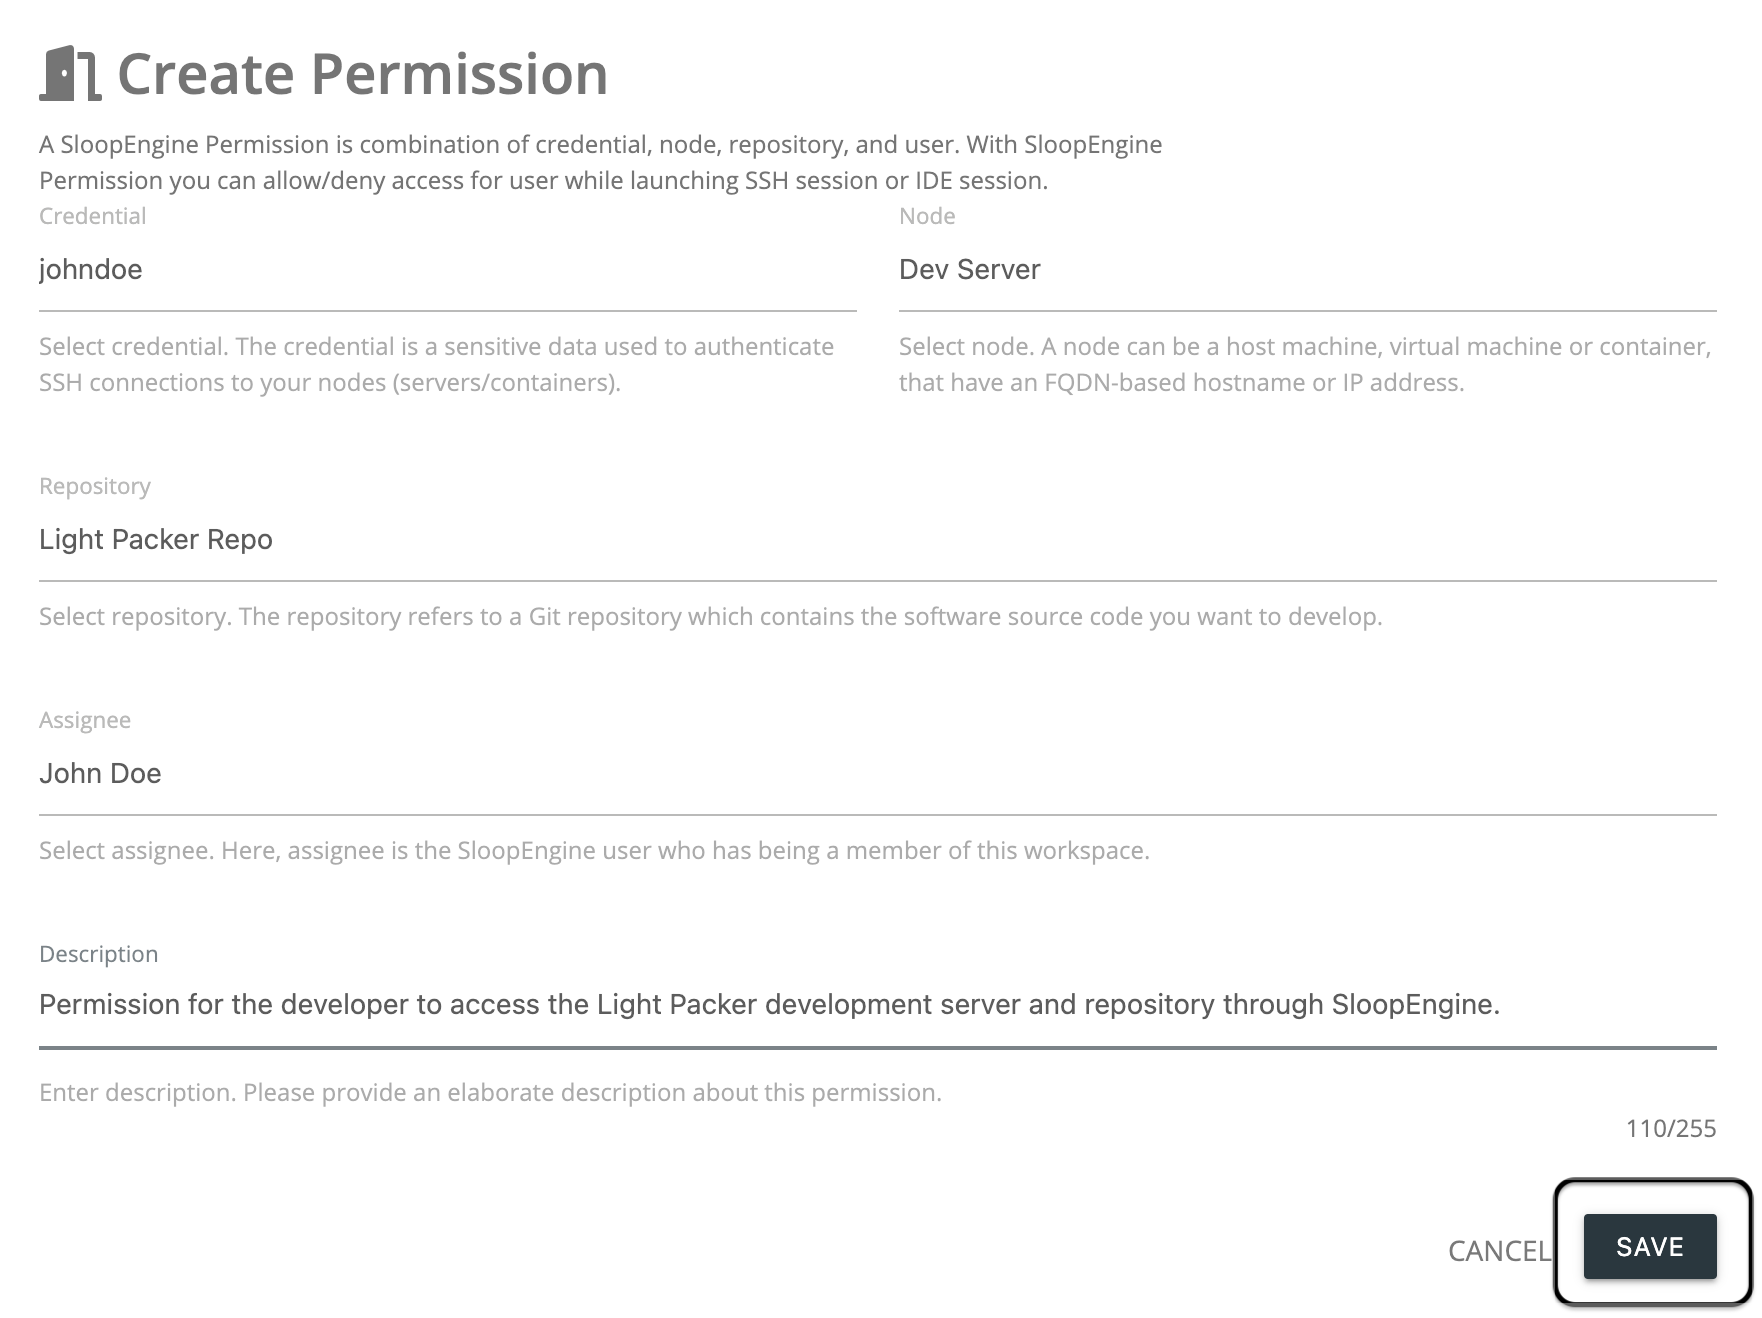 Screenshot of the permission creation form with valid information.